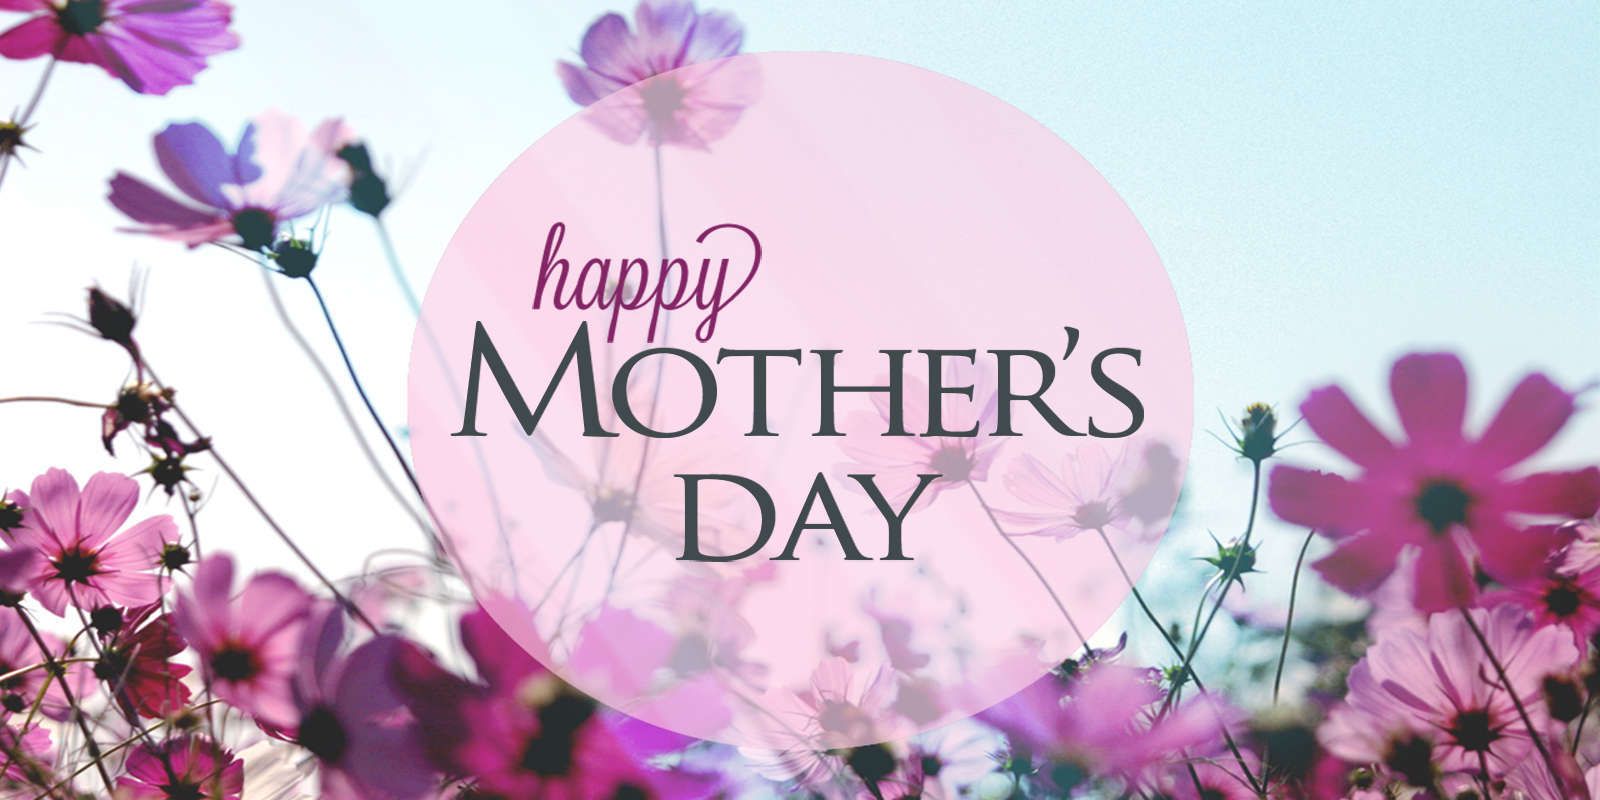 Happy Mother's Day Wallpaper, Happy Mothers Day Wallpaper